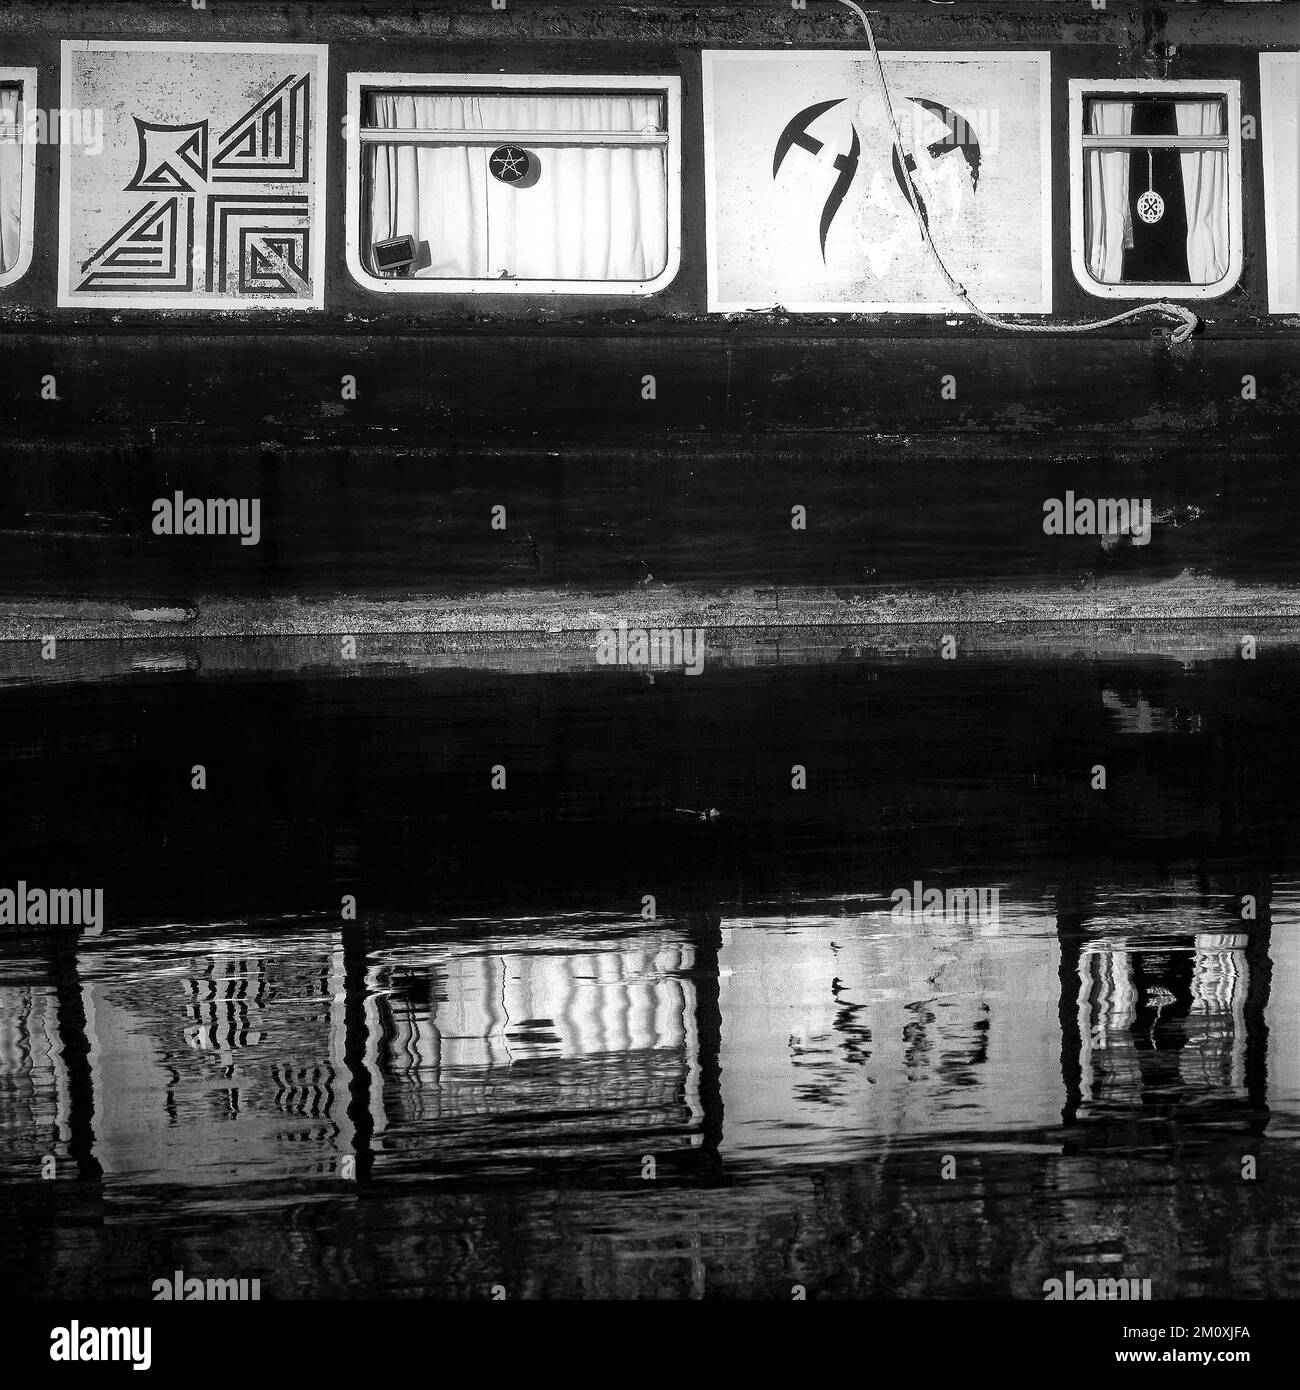 Black and white photograph close up of Narrowboat on British Waterways canalside, showing a Sepia toned infrared image of boat art signage Stock Photo